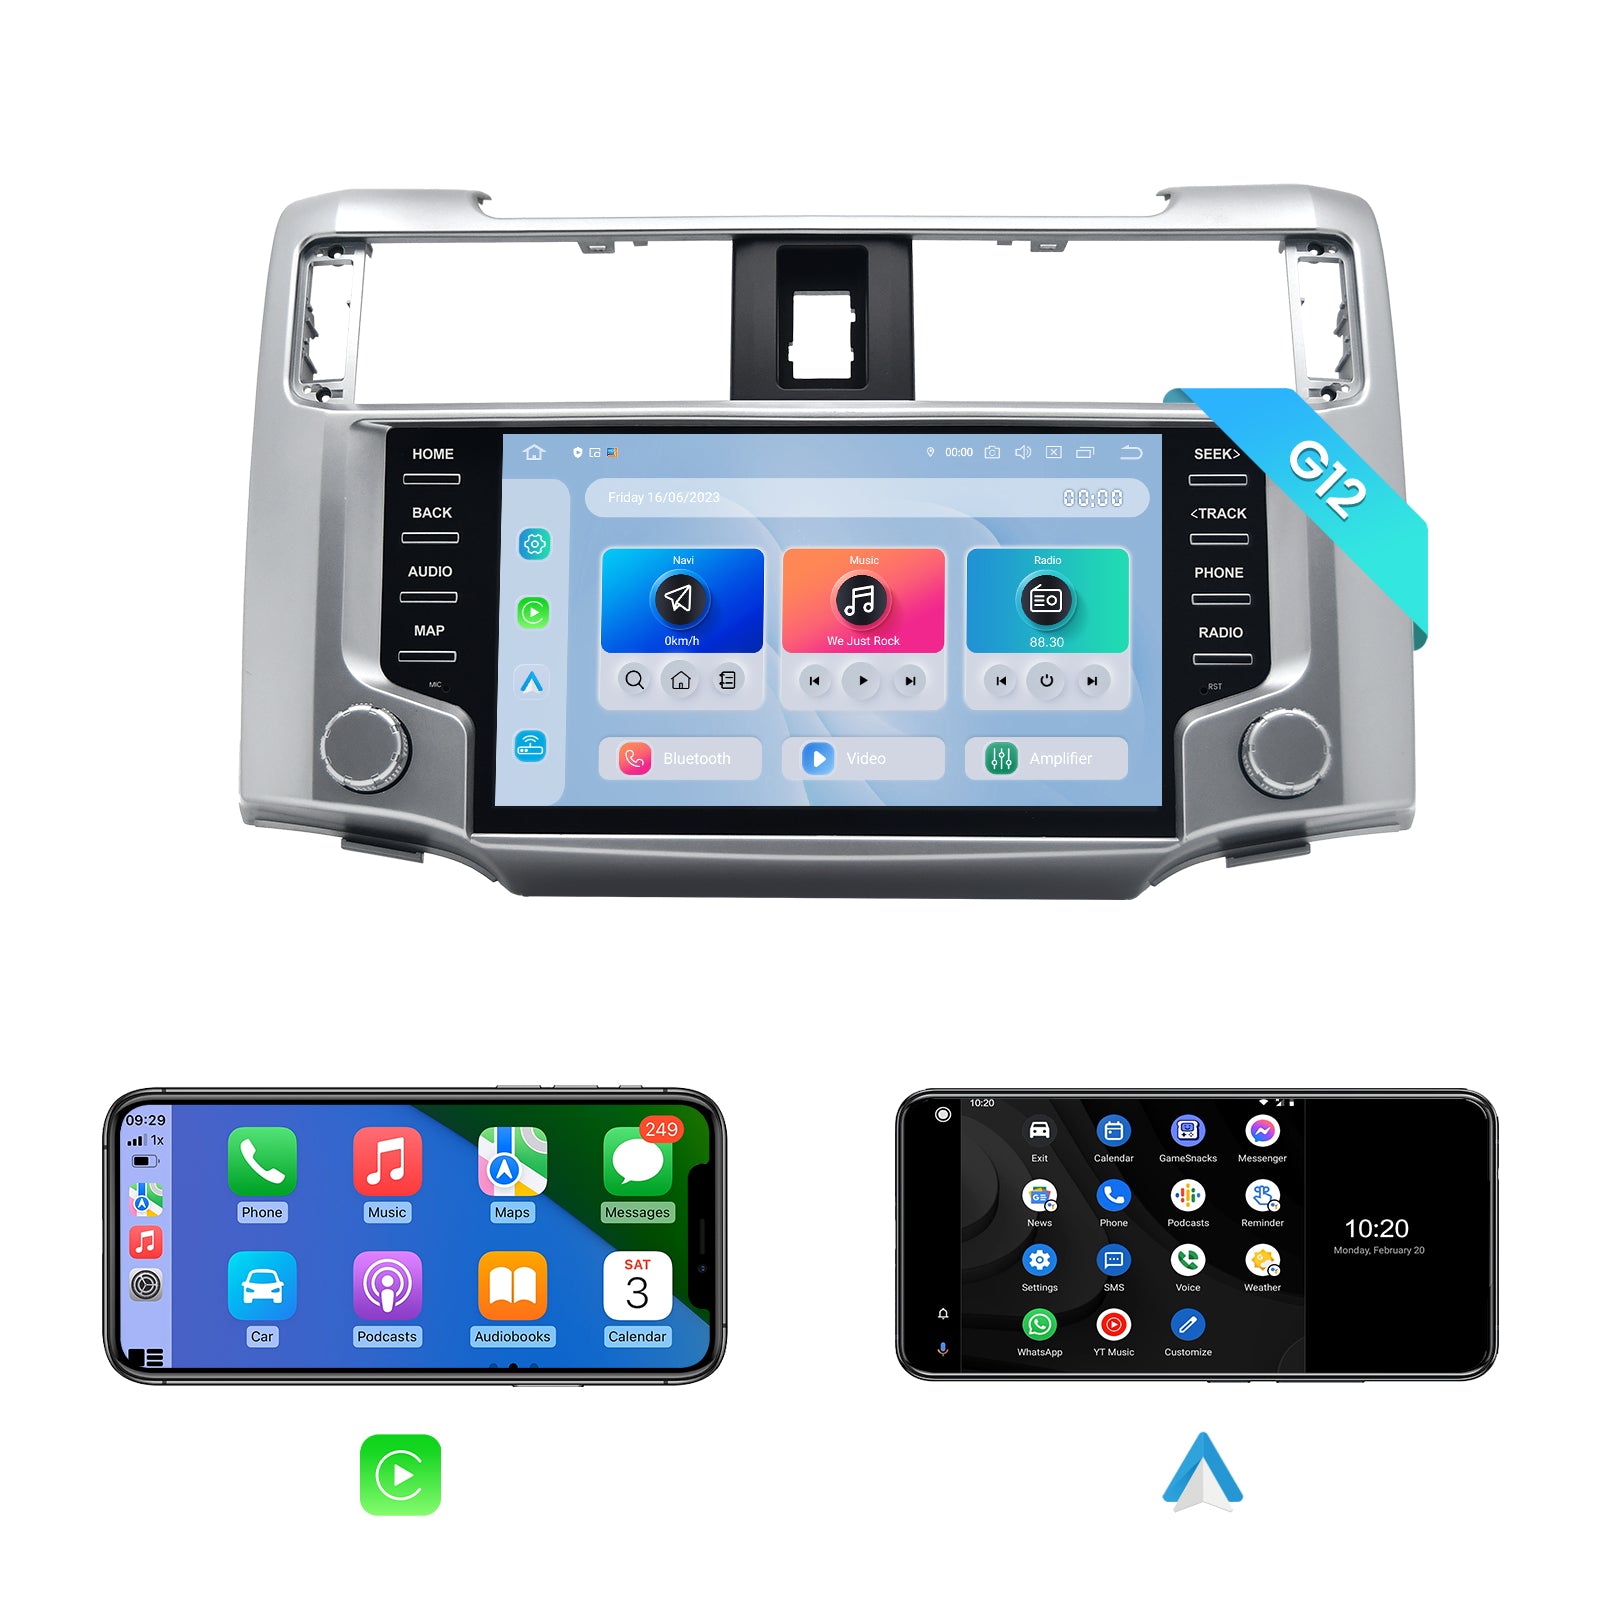 Dasaita Android 12 Car Stereo for Toyota 4Runner 2010-2023 Silver Wireless  Carplay & Android Auto Car Radio | Qualcomm 665 | 9